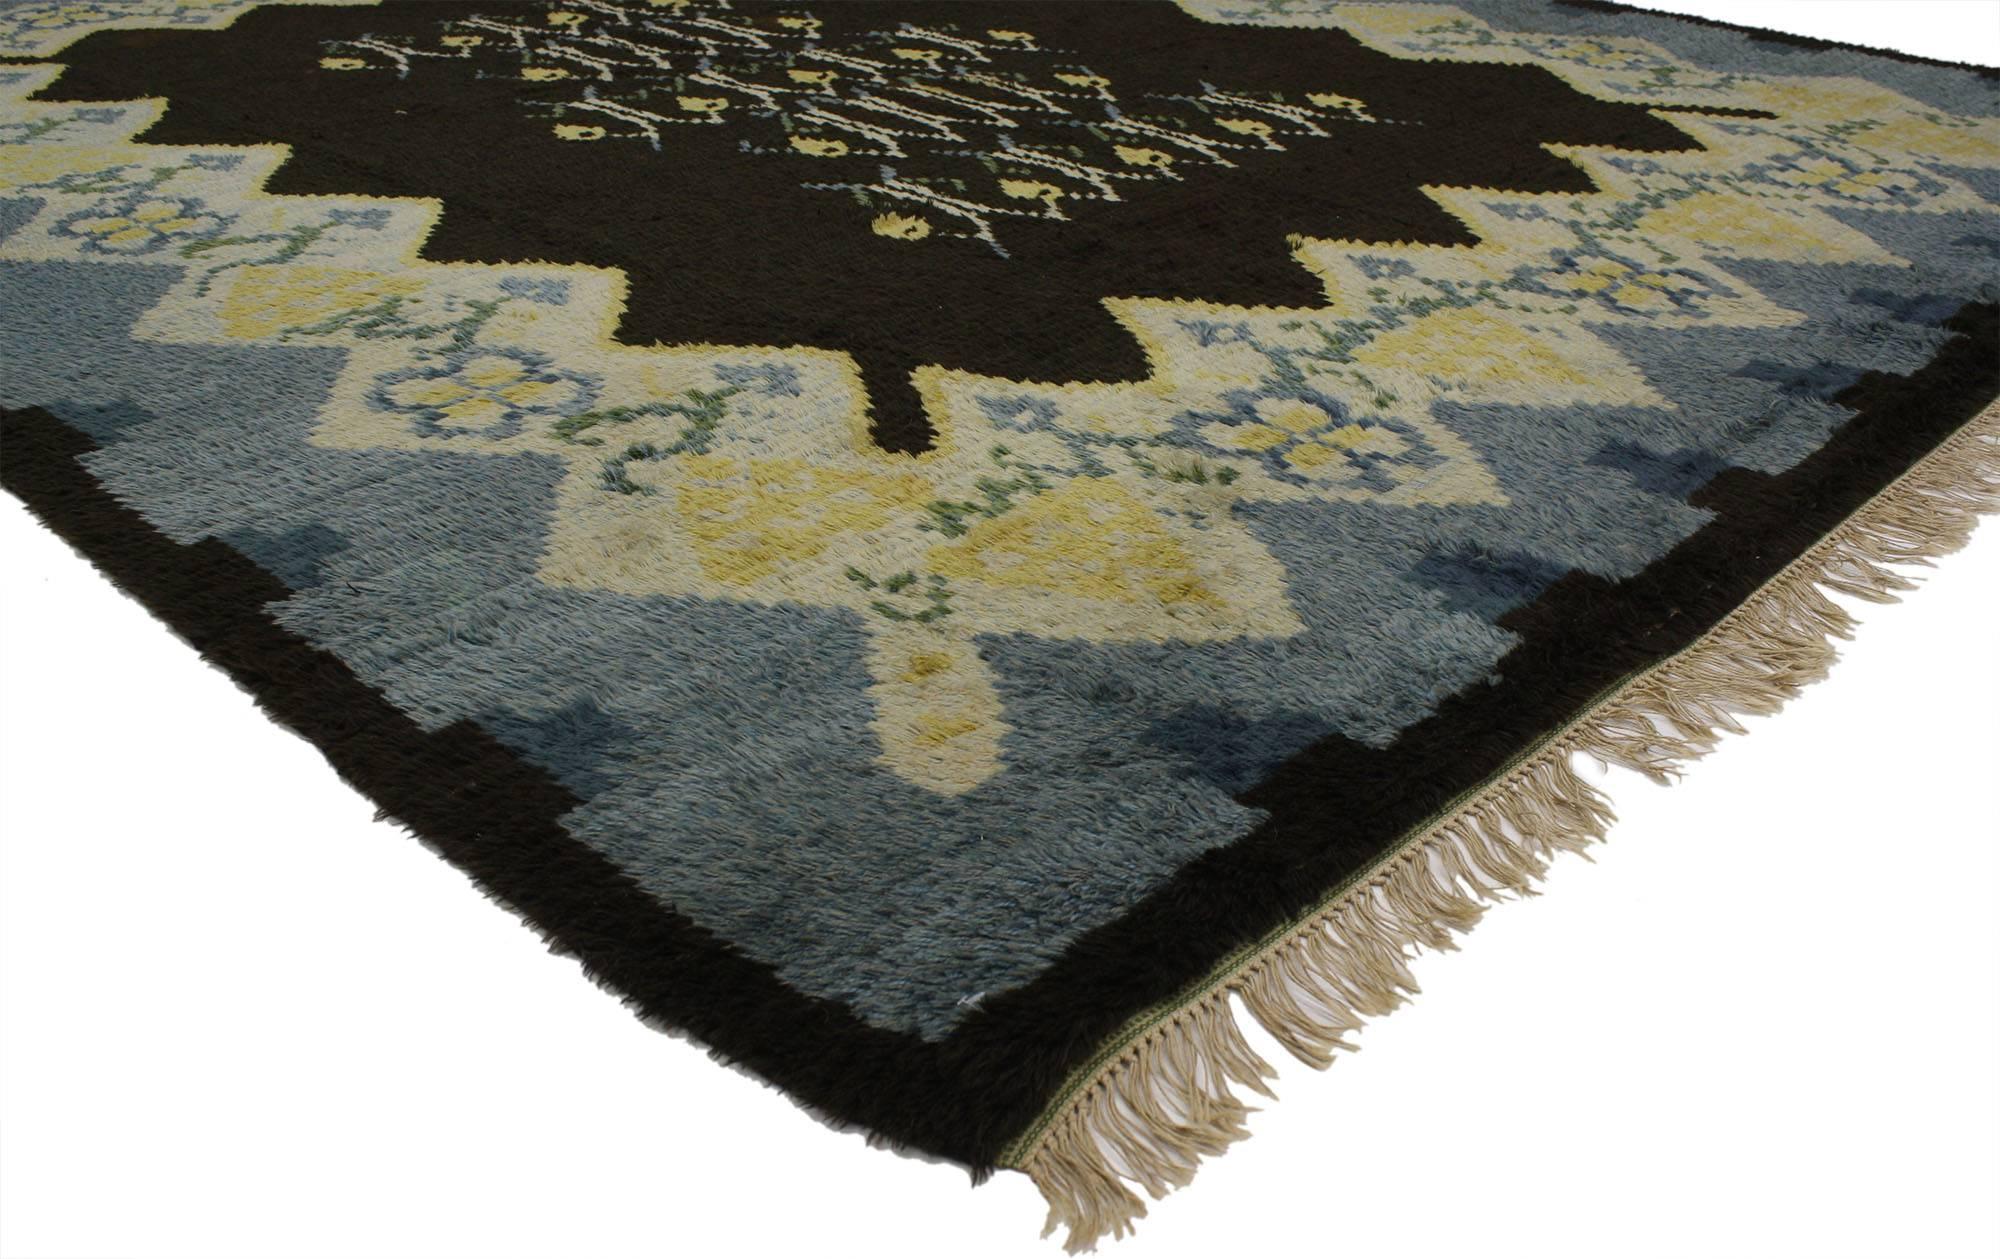 77043, vintage Swedish Rya Shag rug with Scandinavian modern style and Danish design. This vintage Swedish Rya Shag rug with Scandinavian modern style is rich in texture and will add much needed warmth and a pop of color to monochromatic interiors.